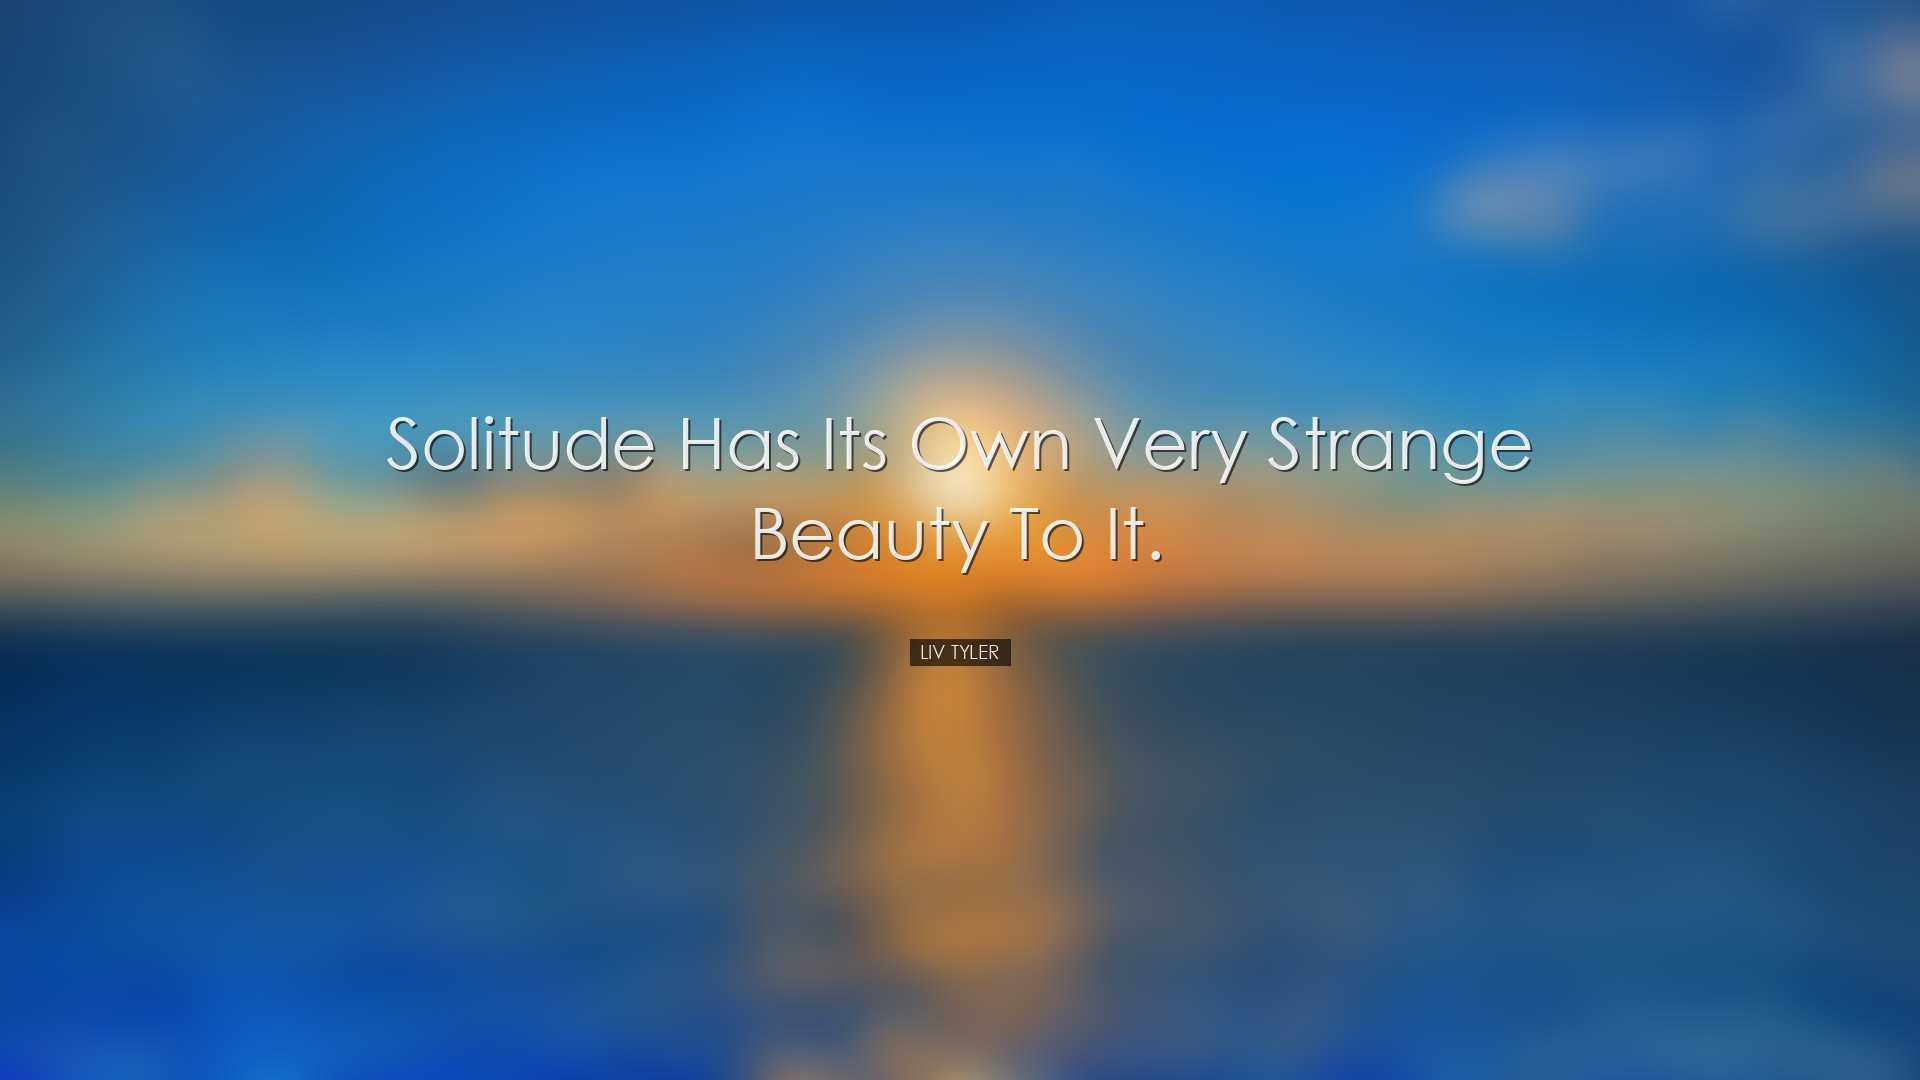 Solitude has its own very strange beauty to it. - Liv Tyler